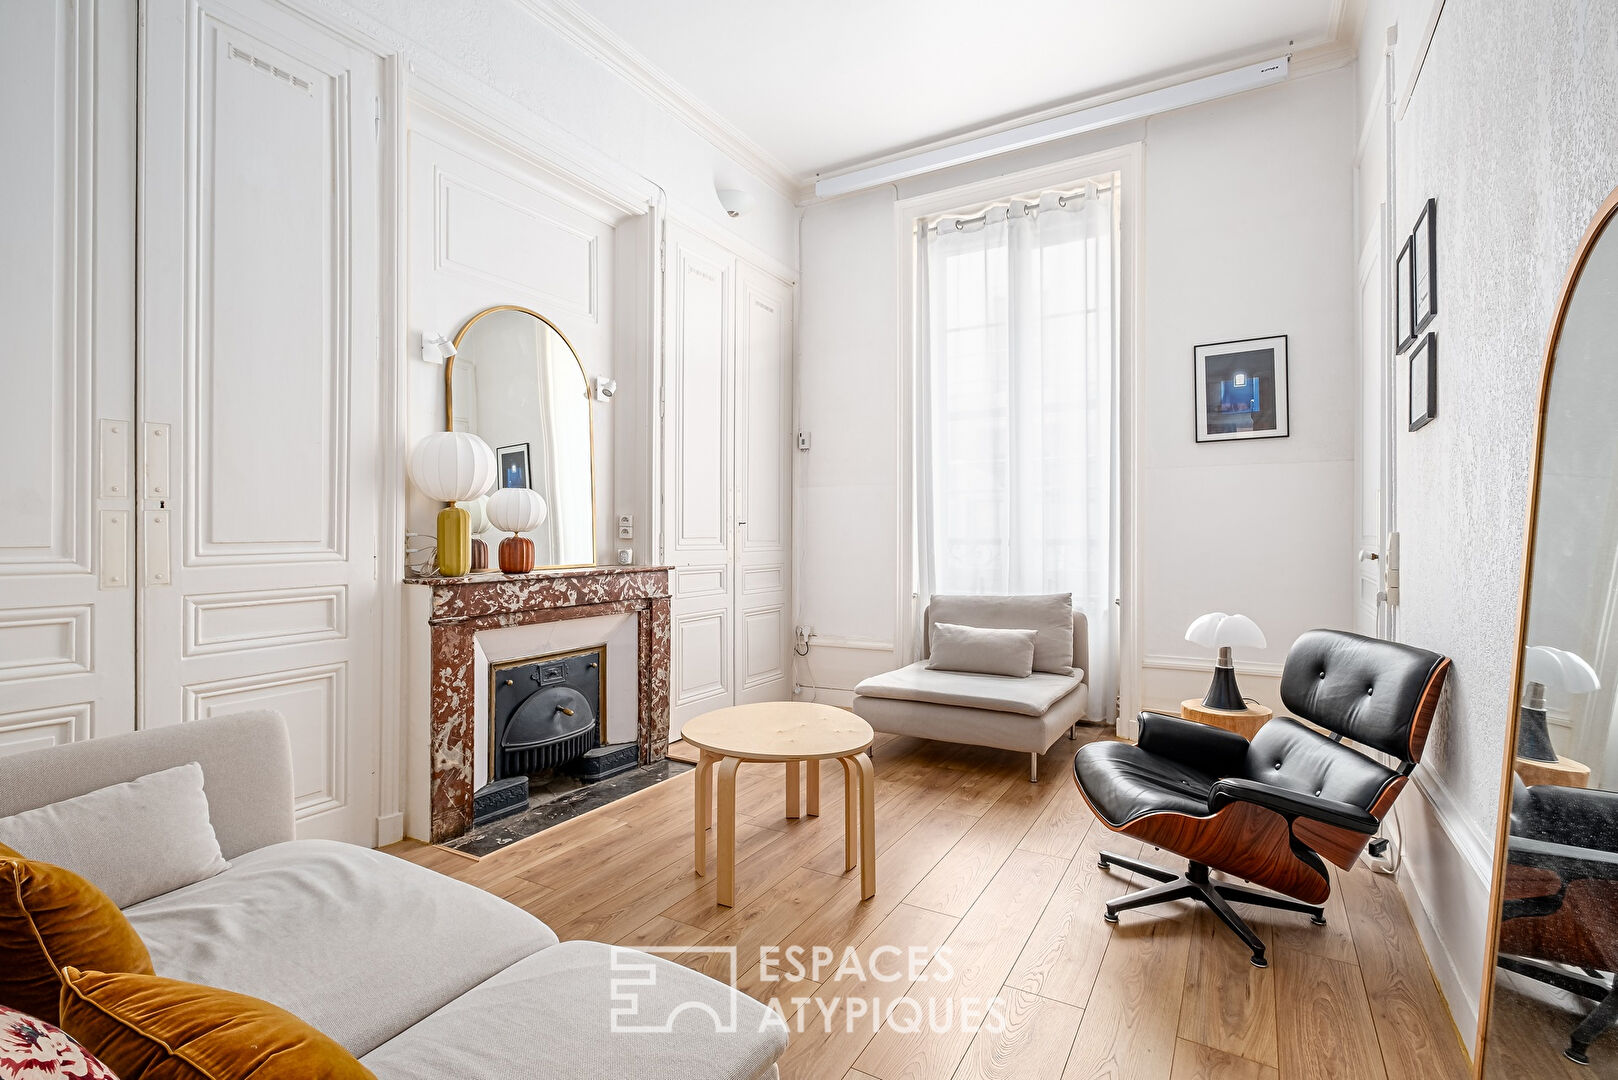 Old renovated apartment in Masséna district